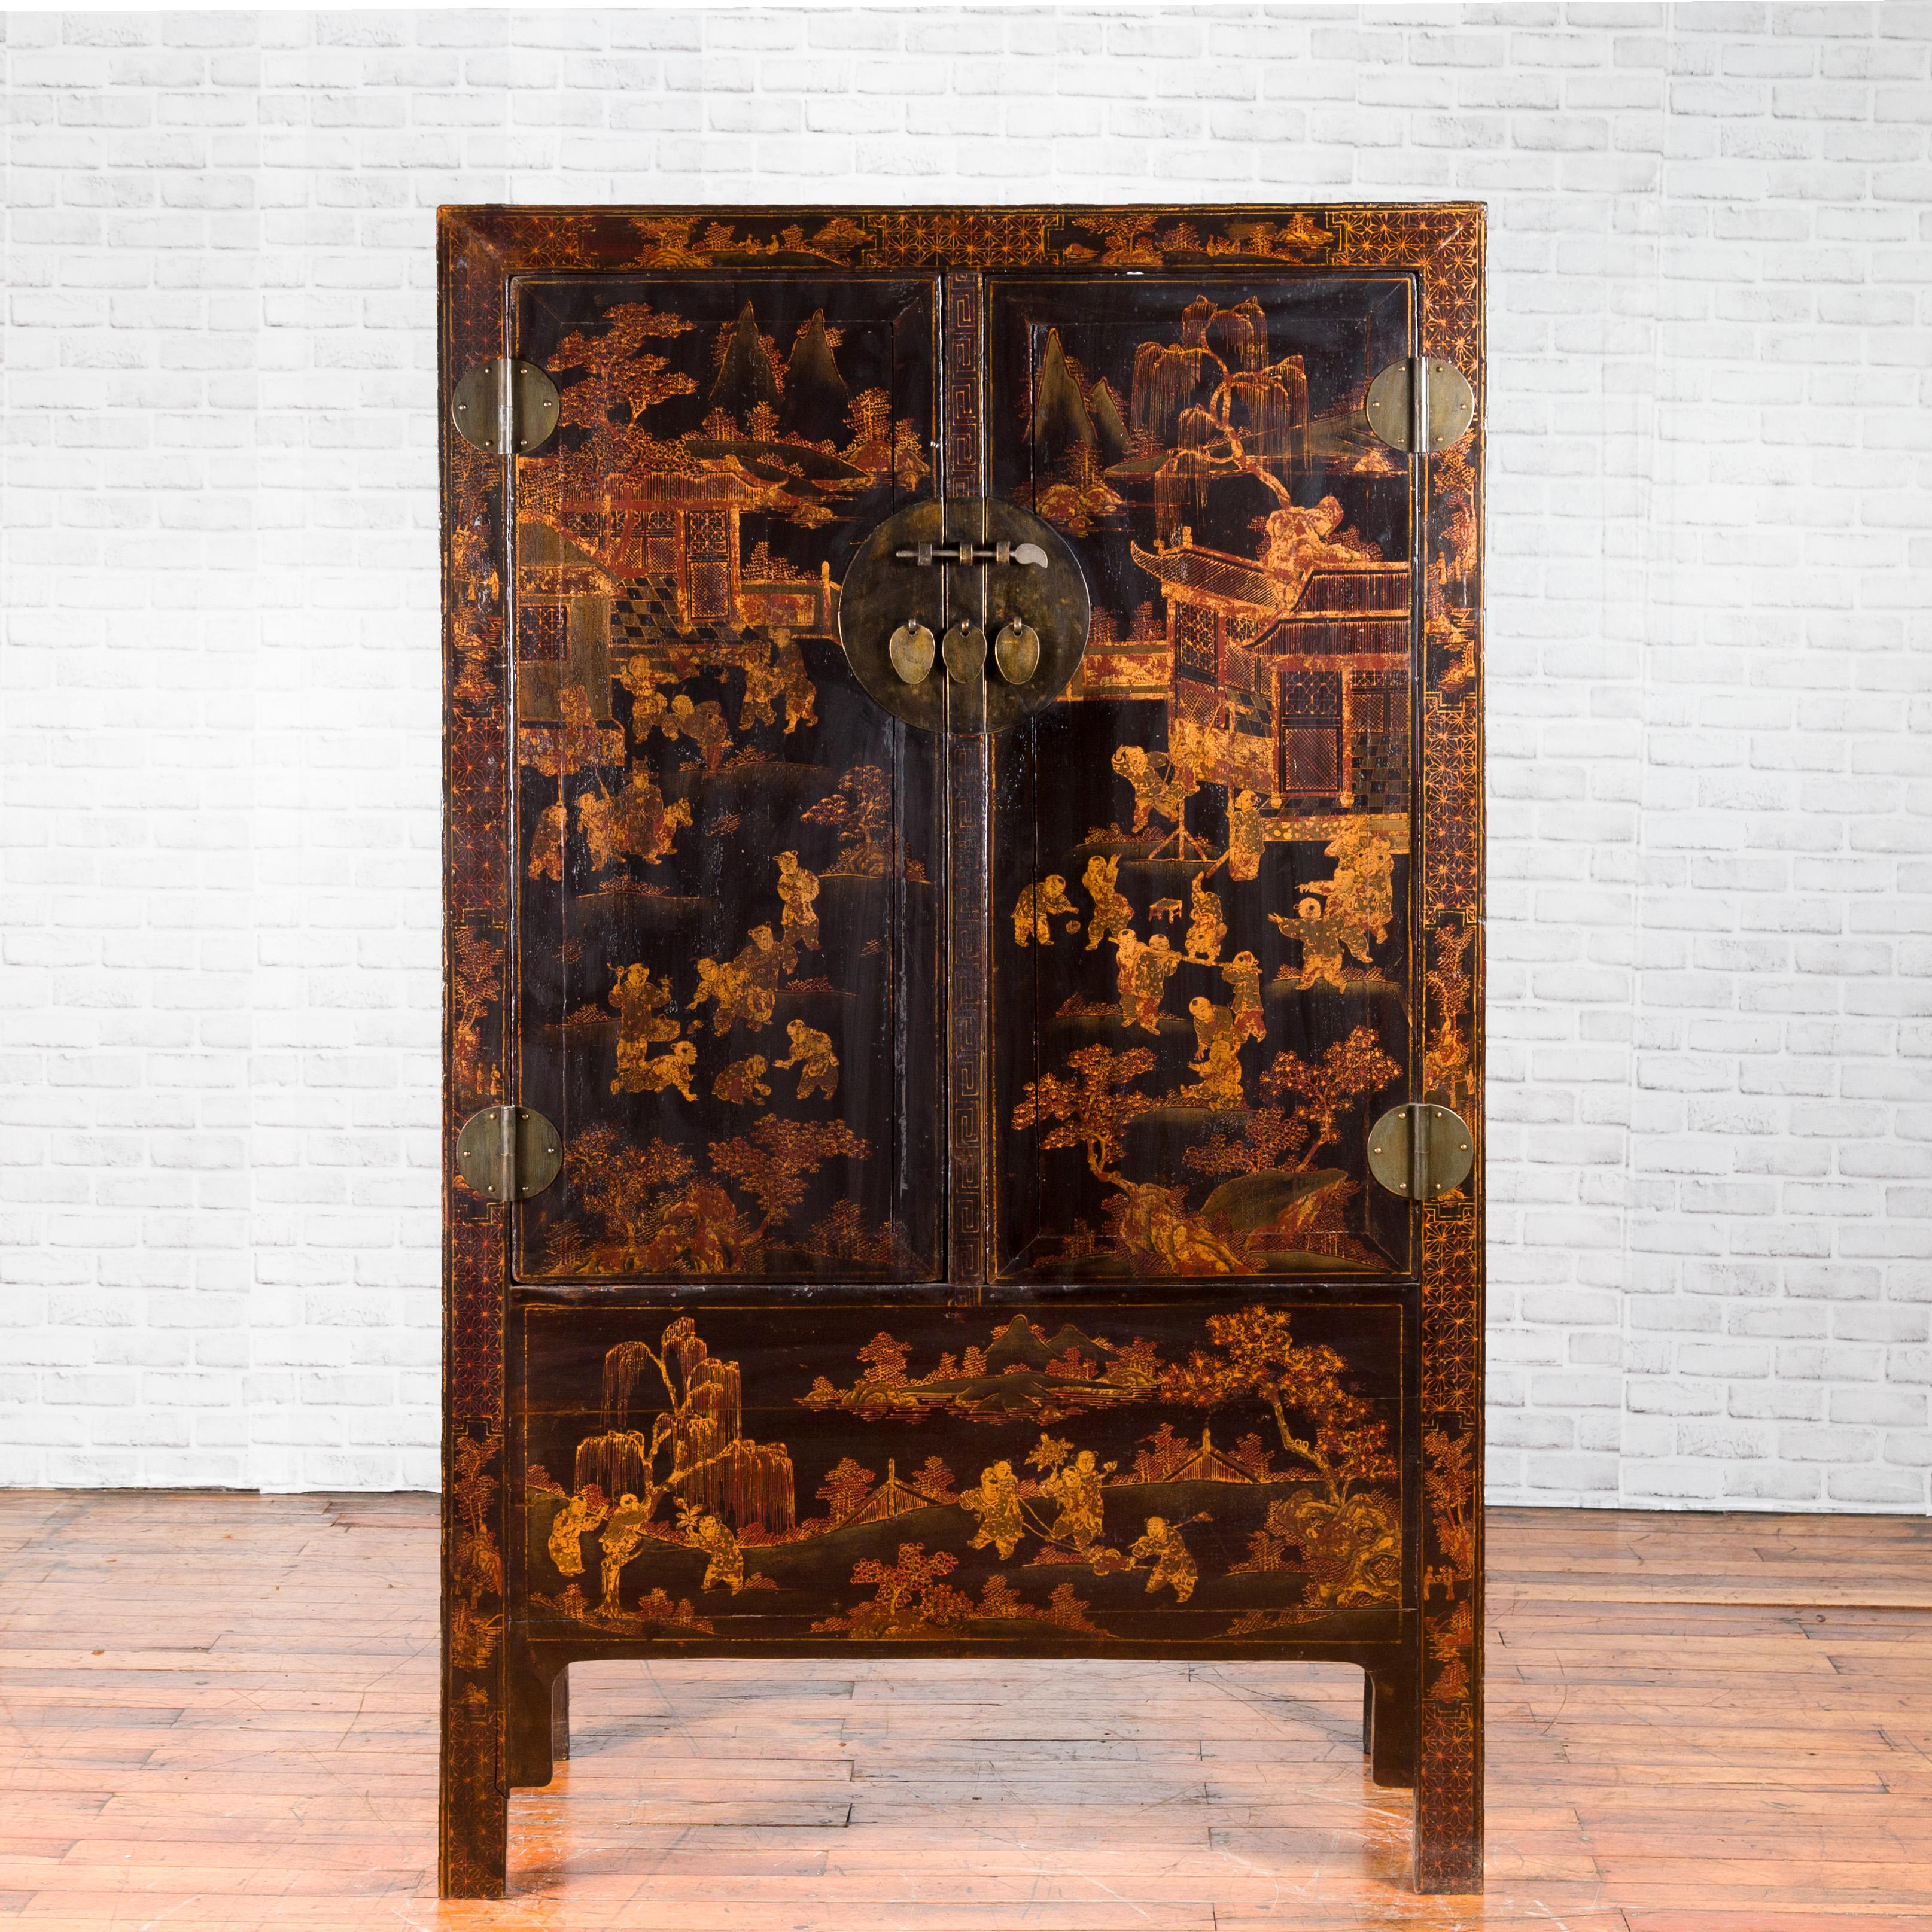 A Chinese Qing dynasty period black lacquer cabinet from the 19th century, with gilded chinoiserie decor, doors and hidden drawers. Created in China during the Qing dynasty, this black lacquered cabinet features a delicate golden chinoiserie decor